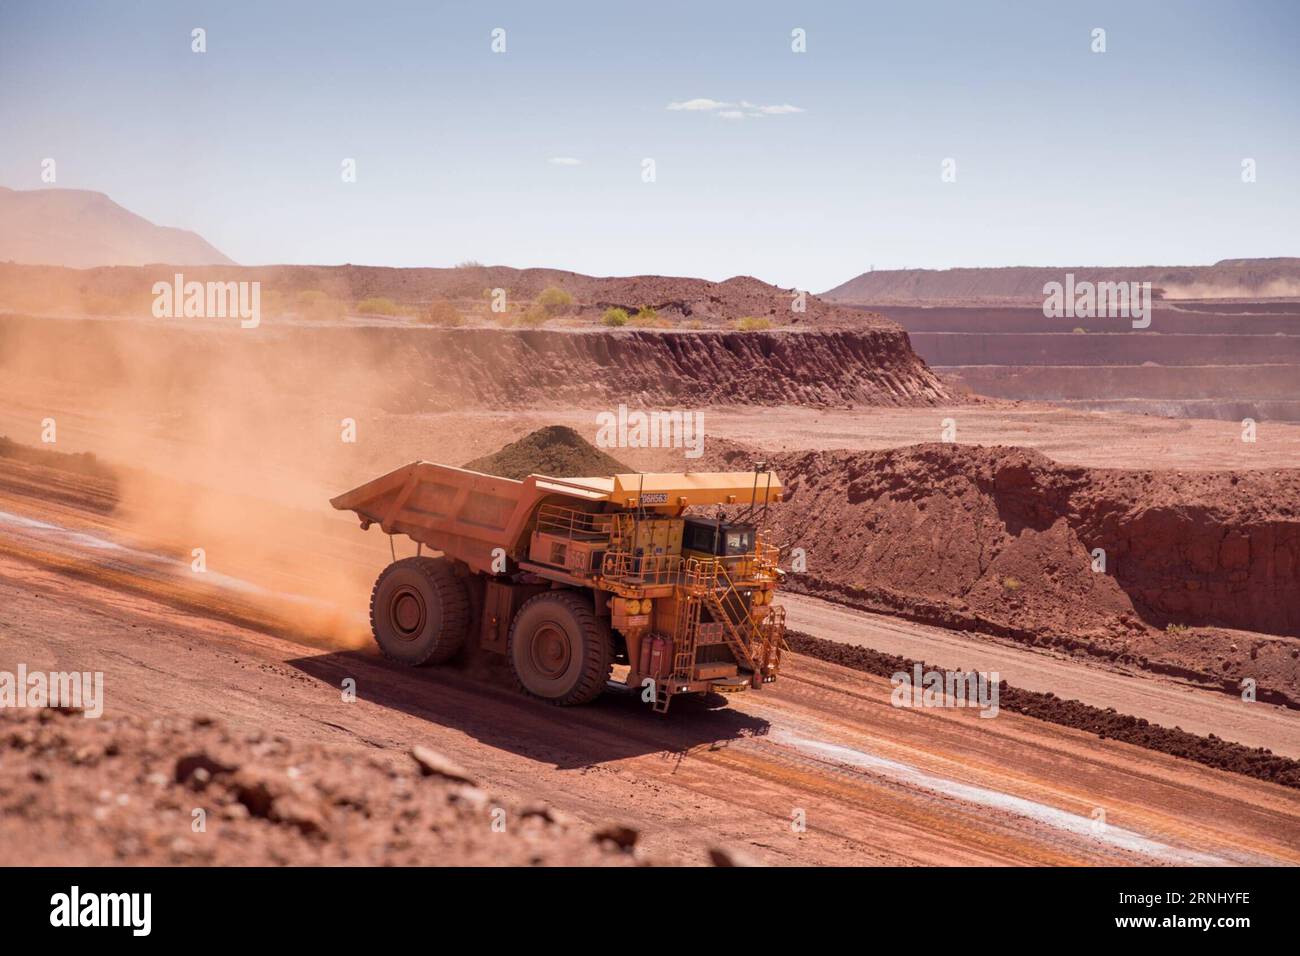 161220 -- SYDNEY, Dec. 20, 2016 -- An autonomous truck transports iron ore at Rio Tinto Ltd. s Nammuldi below water table mine in Pilbara region, Australia, Dec. 14, 2016. Rio Tinto is currently in negotiations with steel makers Baosteel Group and Shougang Group over a new pricing mechanism for its Australian ore, however the key customers haven t yet agreed to the terms. Rio Tinto s seeking of a new pricing mechanism for its iron ore with Chinese customers is justified given the dramatic lift in coking coal prices, chief executive Jean-Sebastian Jacques believes. zcc AUSTRALIA-RIO TINTO LTD.- Stock Photo